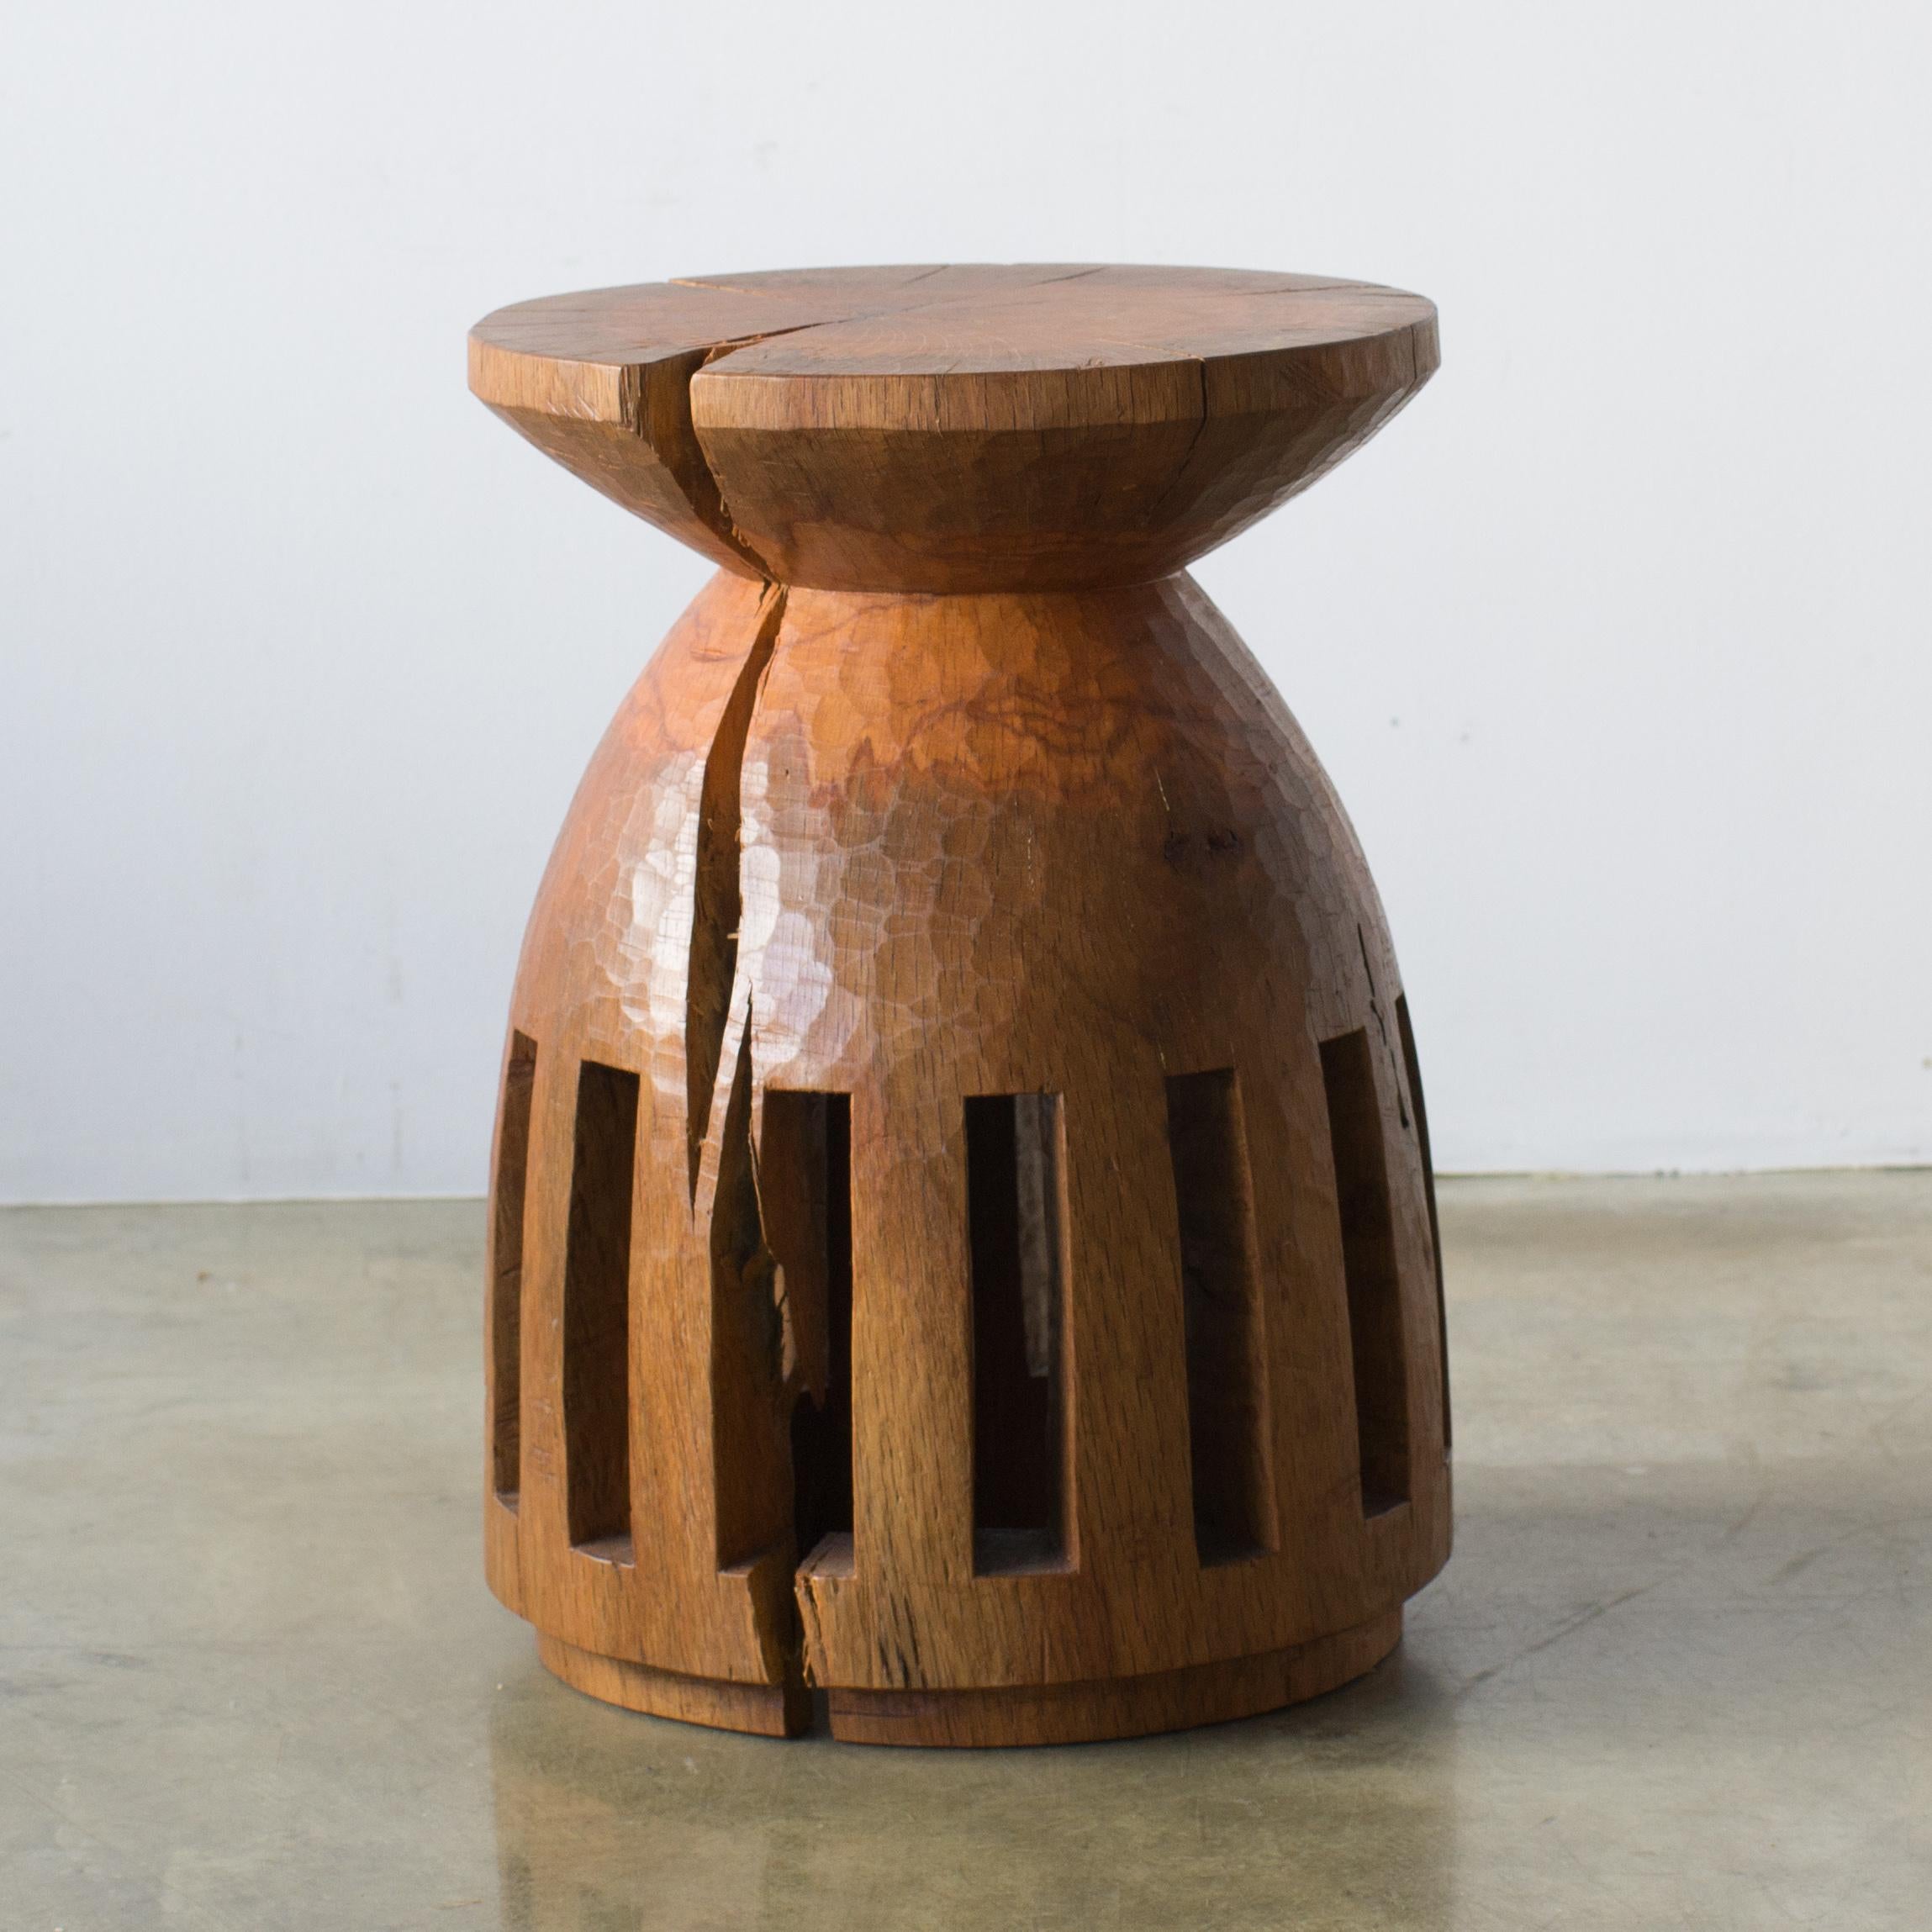 Name: A day for going to the ocean
Sculptural stool by Hiroyuki Nishimura and zone carved furniture
Material: Quercus.
This work is carved from log with some kinds of chainsaws.
Most of wood used for Nishimura's works are unable to use anything,